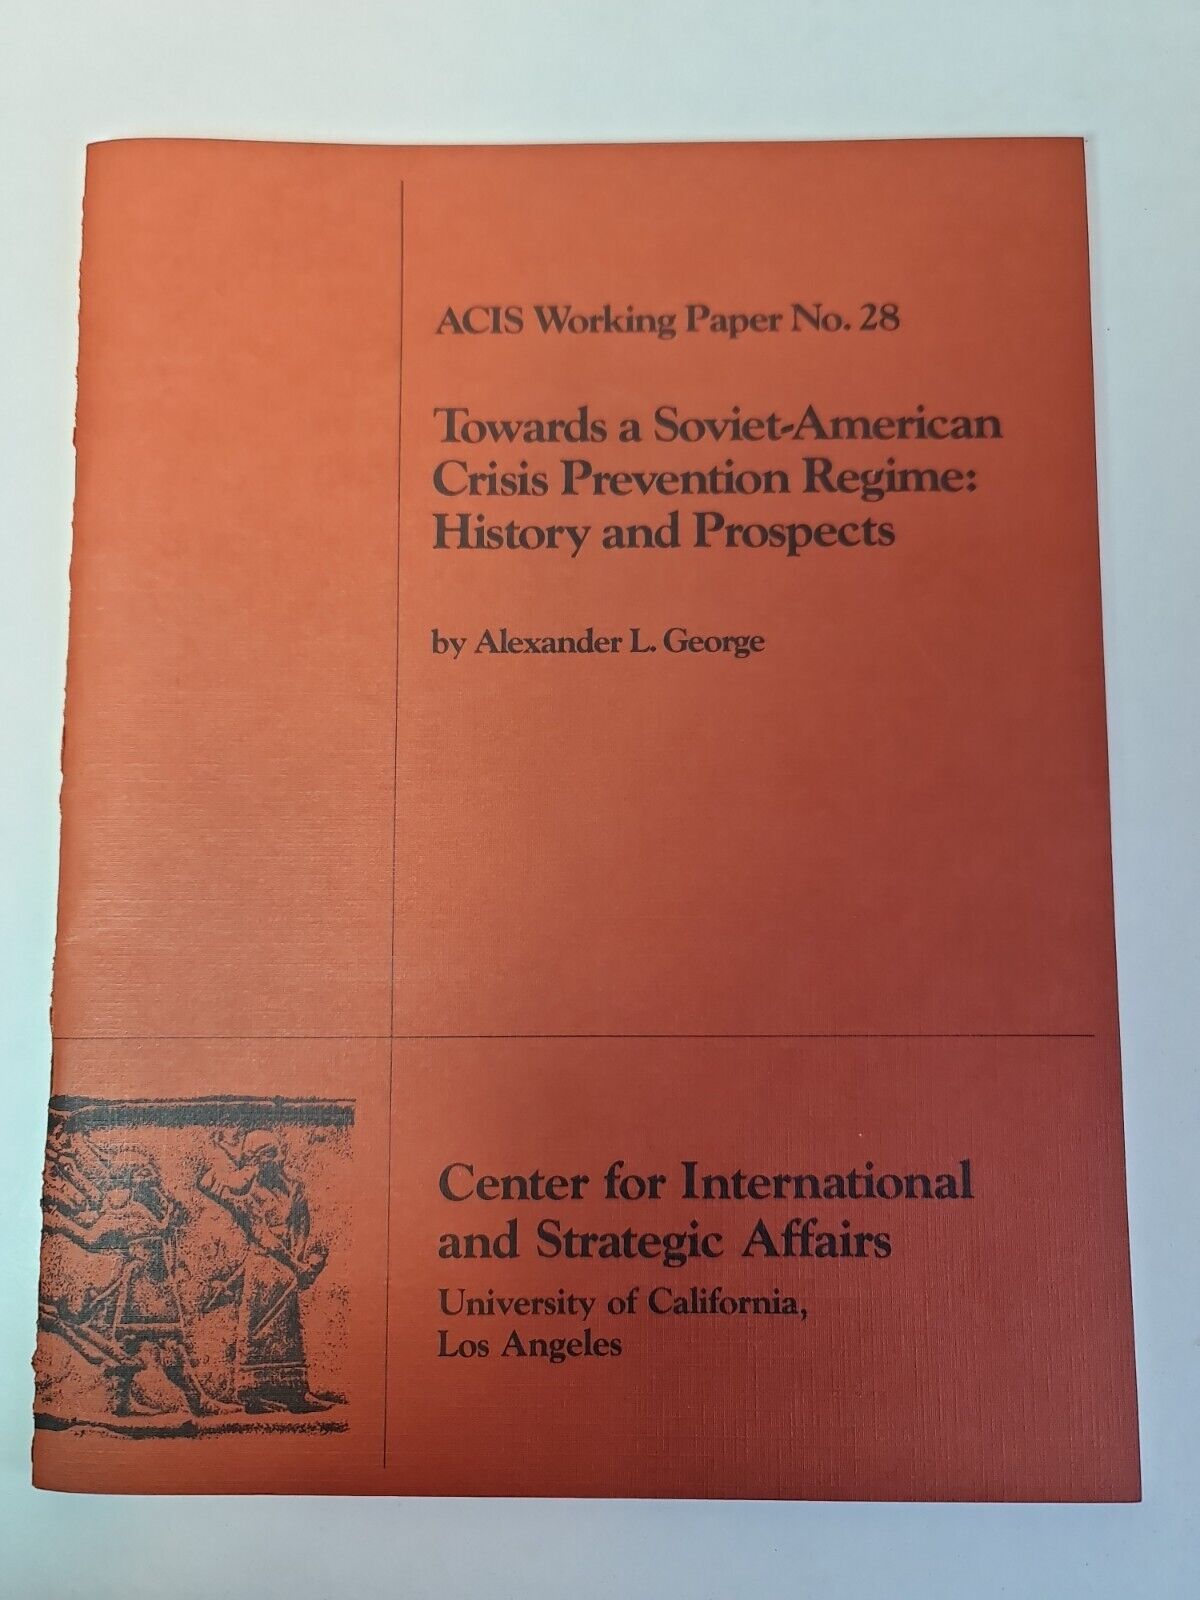 Towards a Soviet-American Crisis Prevention Regime... by Alexander L George